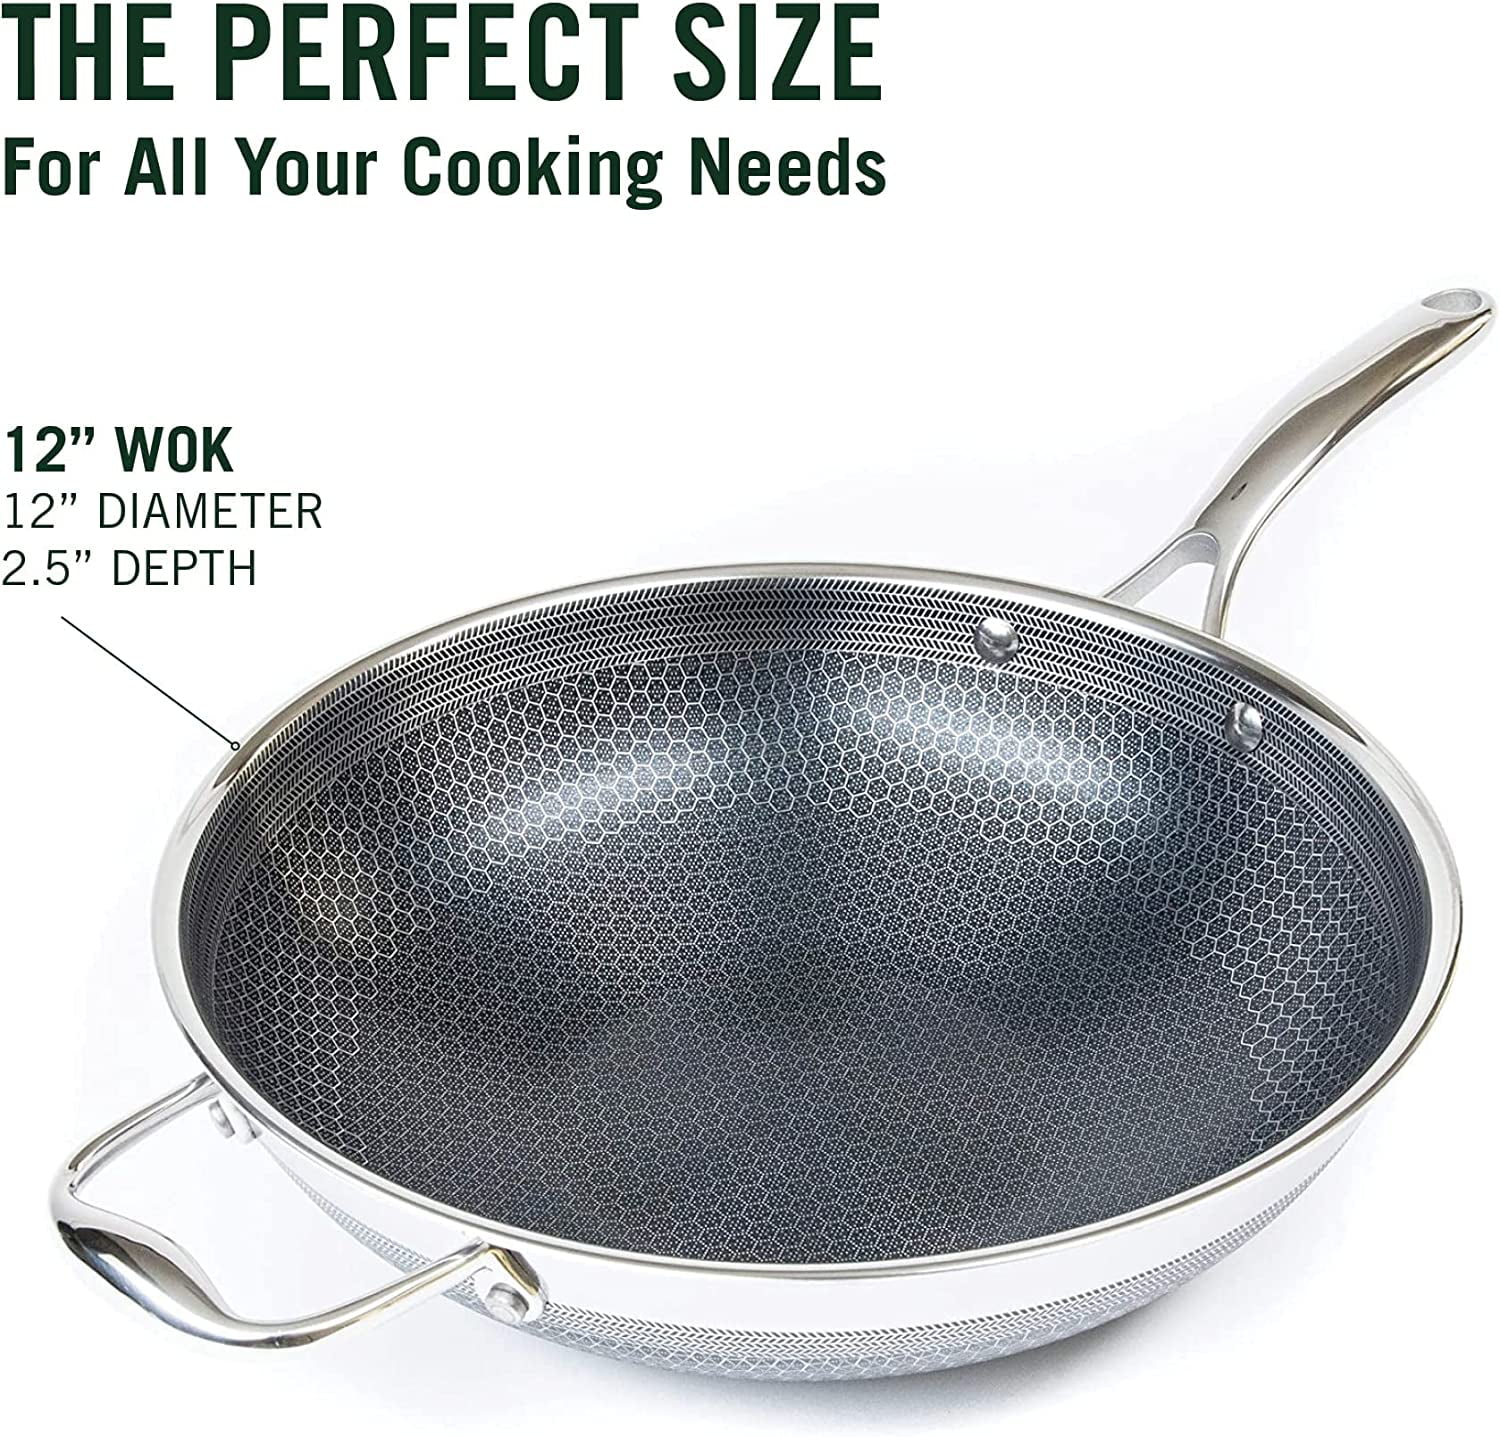 I needed a new wok so I bought this from @hexclad for 20% off